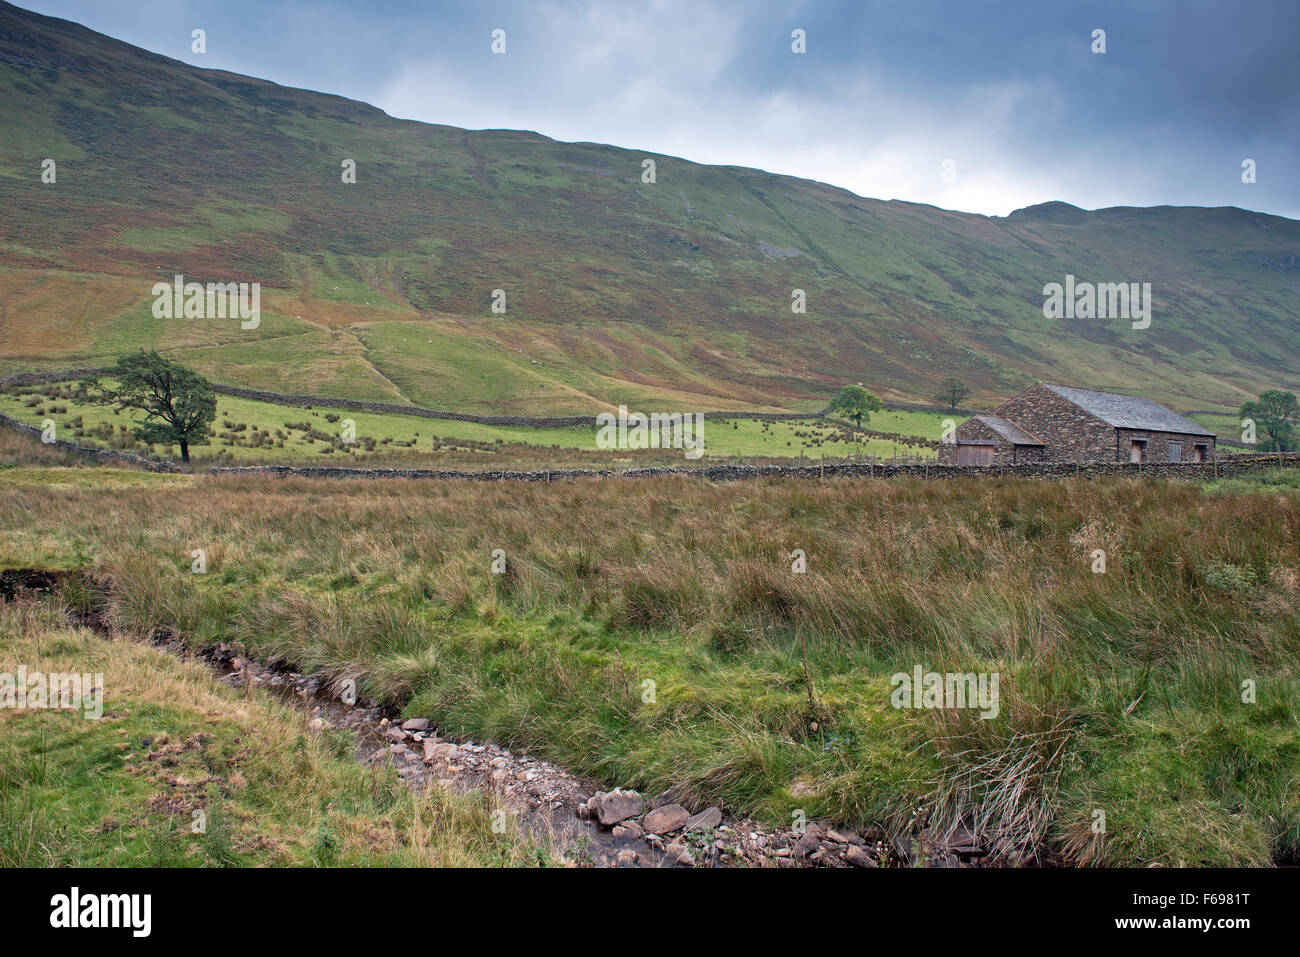 A derelict building in the Boredale Valley, Martindale, Lake District, Cumbria, England, Uk, Gb. Stock Photo